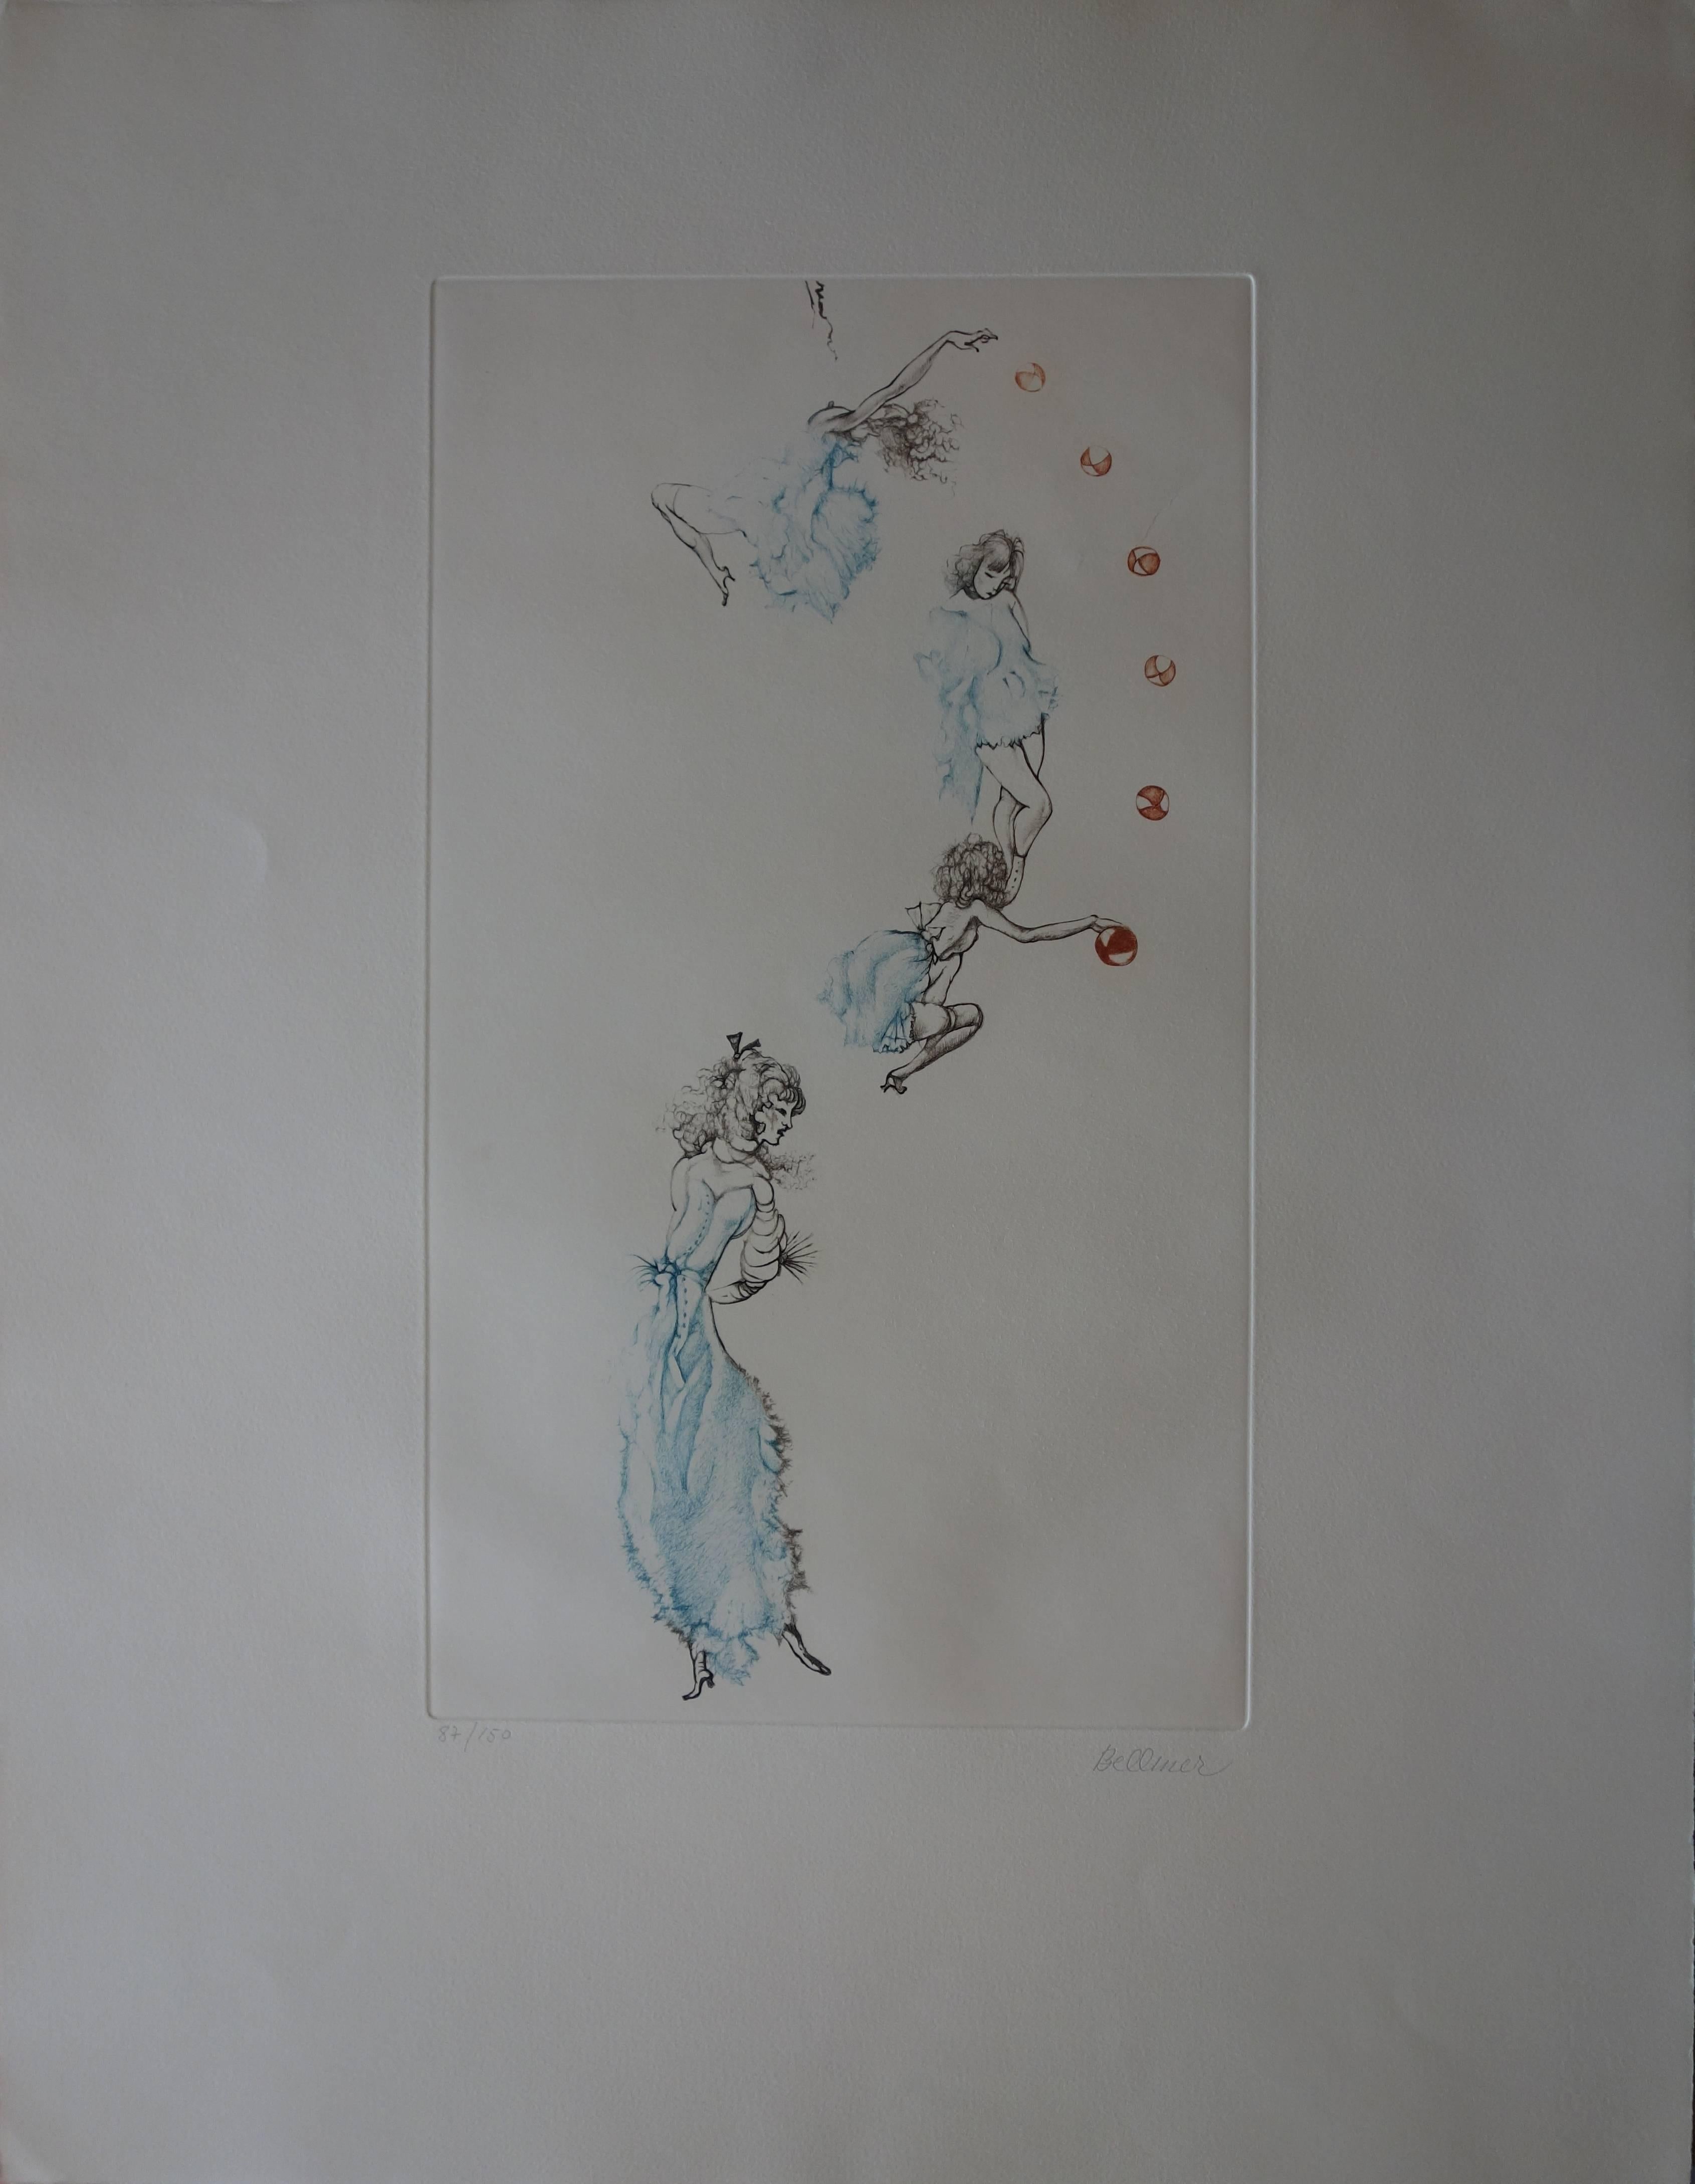 Woman Playing With a Red Ball - Original handsigned etching - 150ex - Modern Print by Hans Bellmer